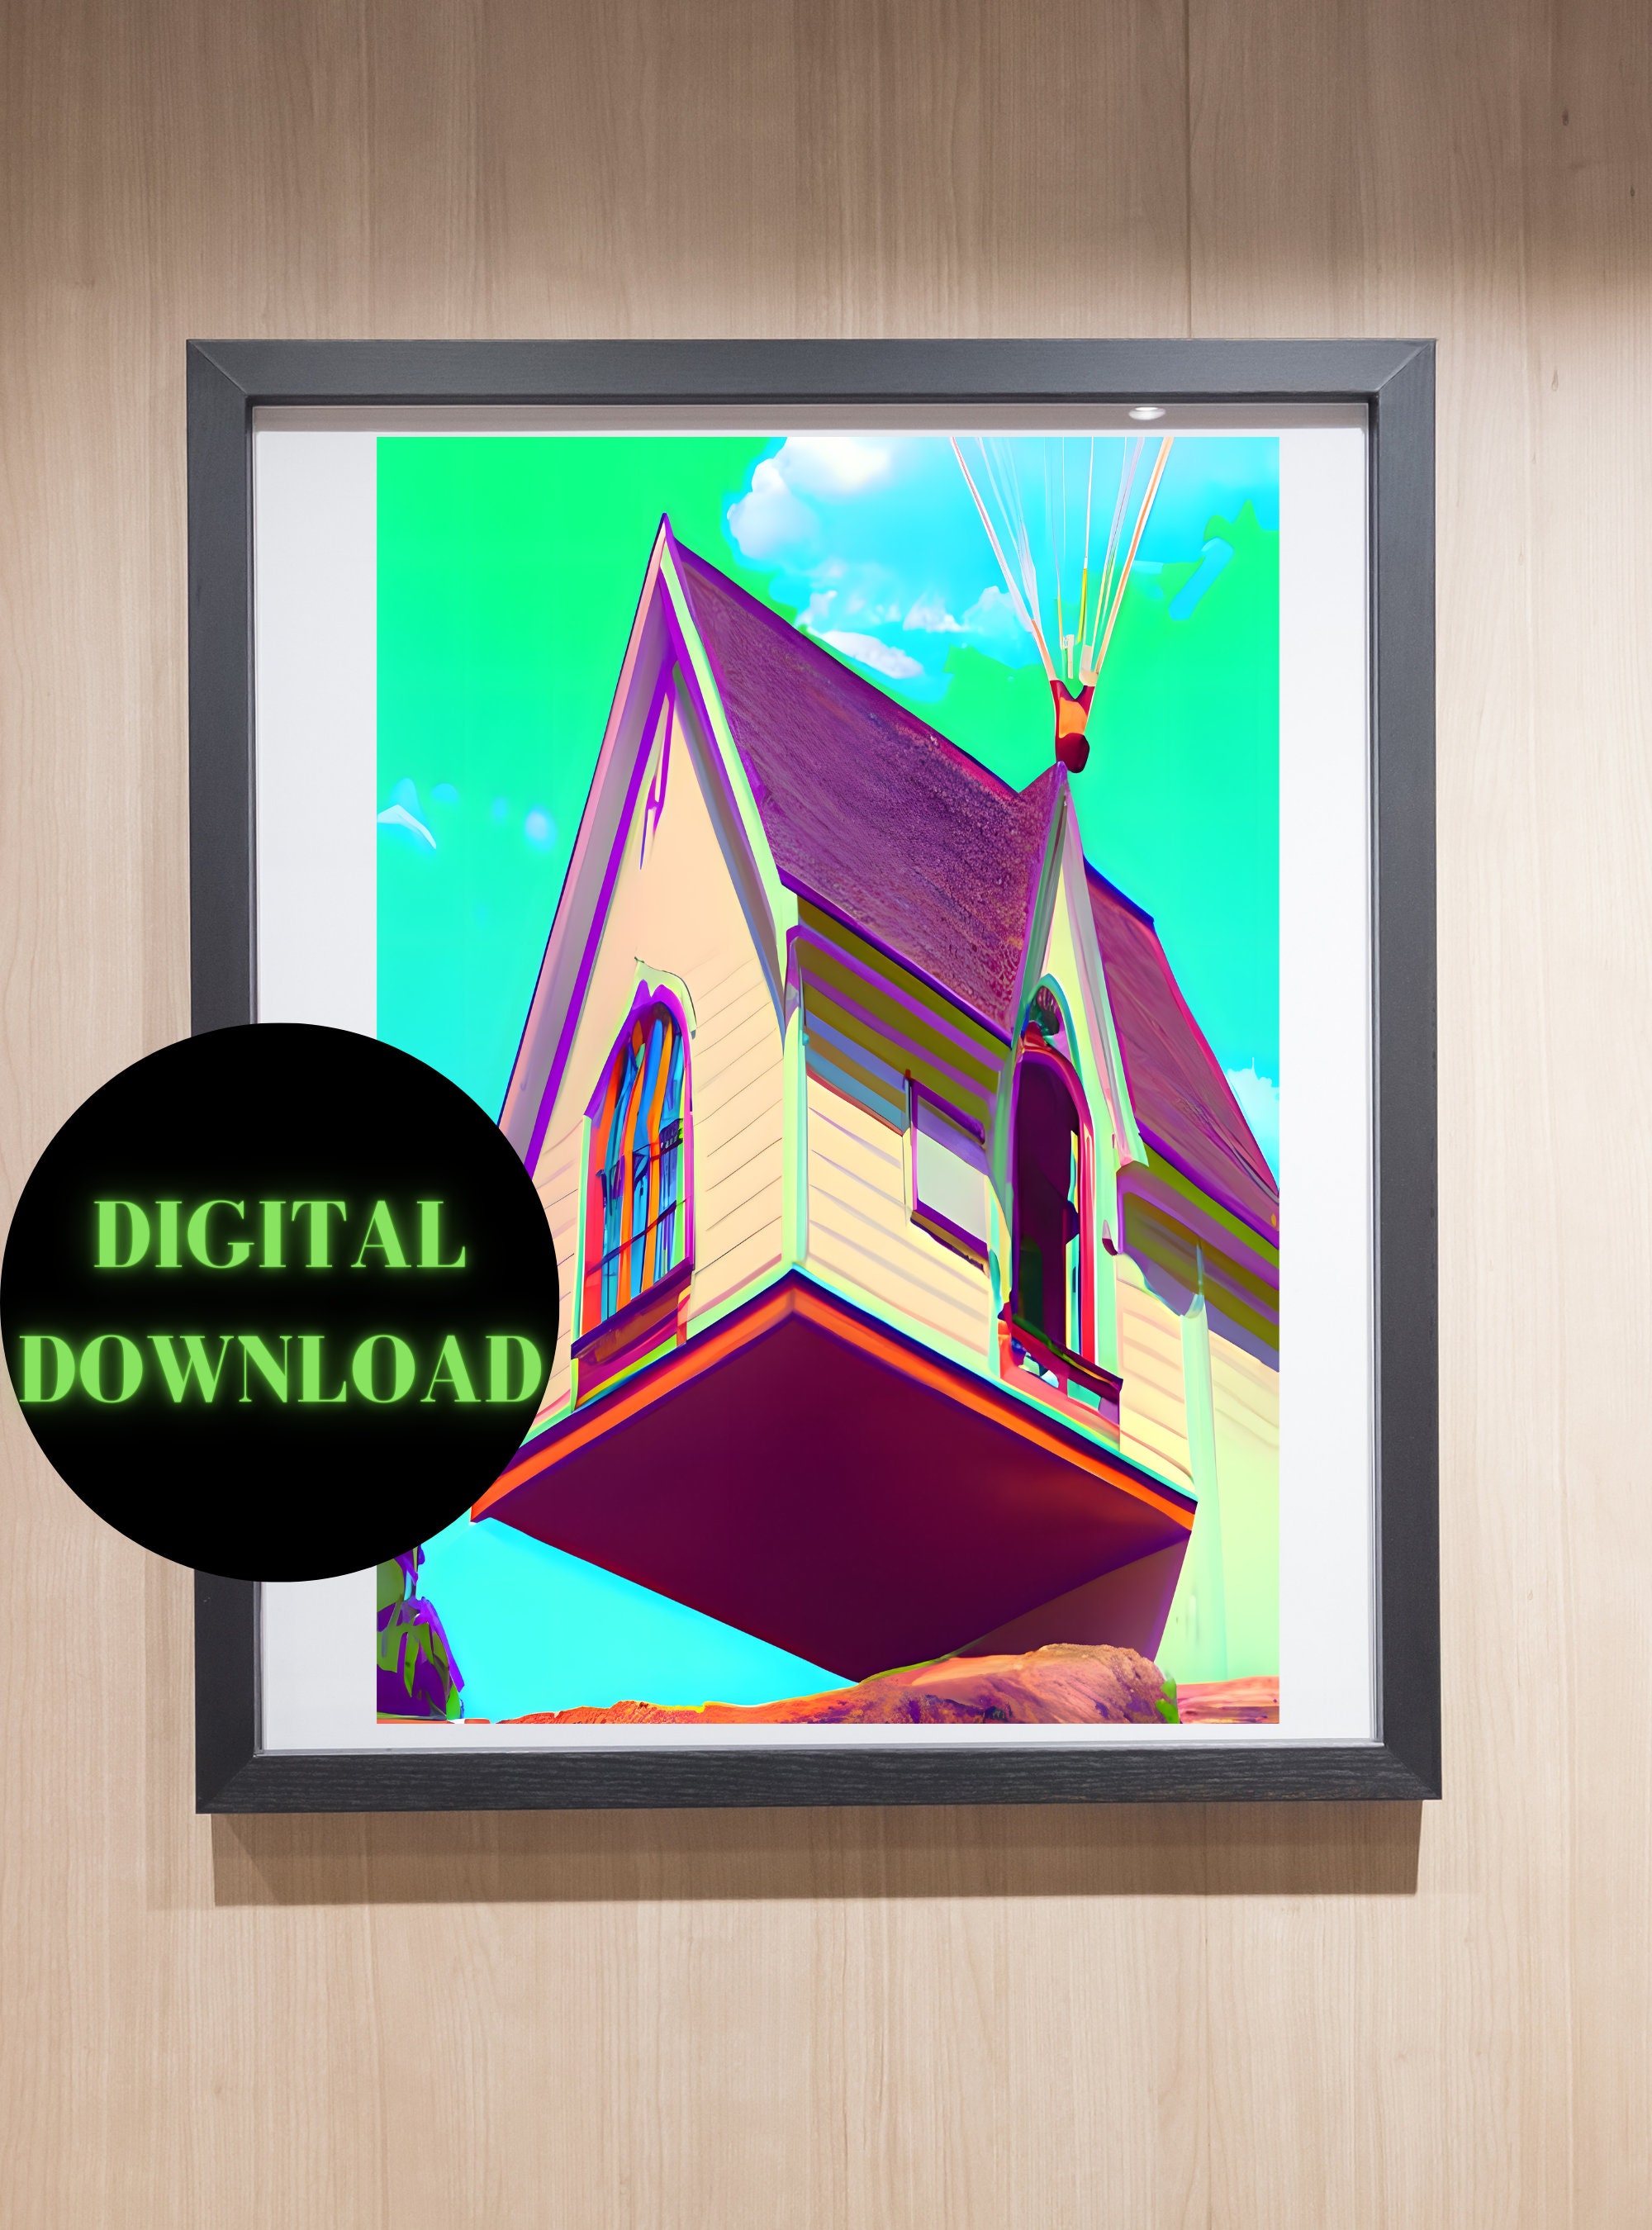 Dreamcore Background House, Weirdcore Aesthetic Edit - Dreamcore - Pin